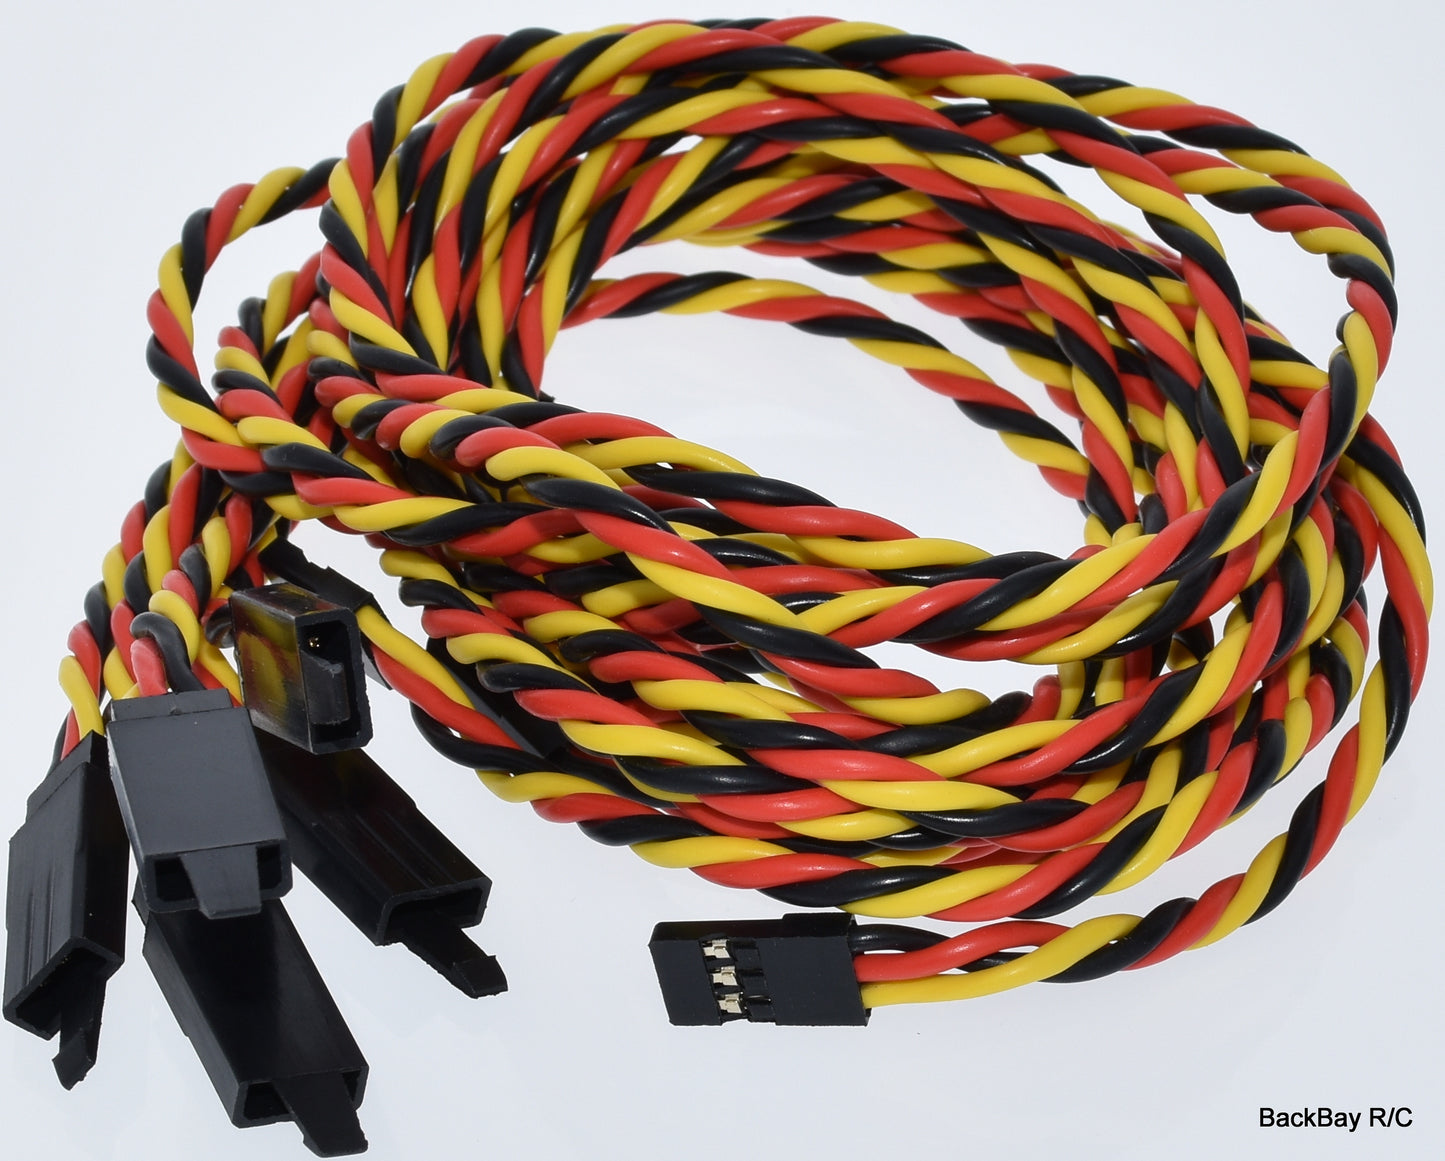 JR / Hitec Servo Extension Leads with Heavy Duty Twisted 20awg Wire and Safety Clips - 8 Lengths